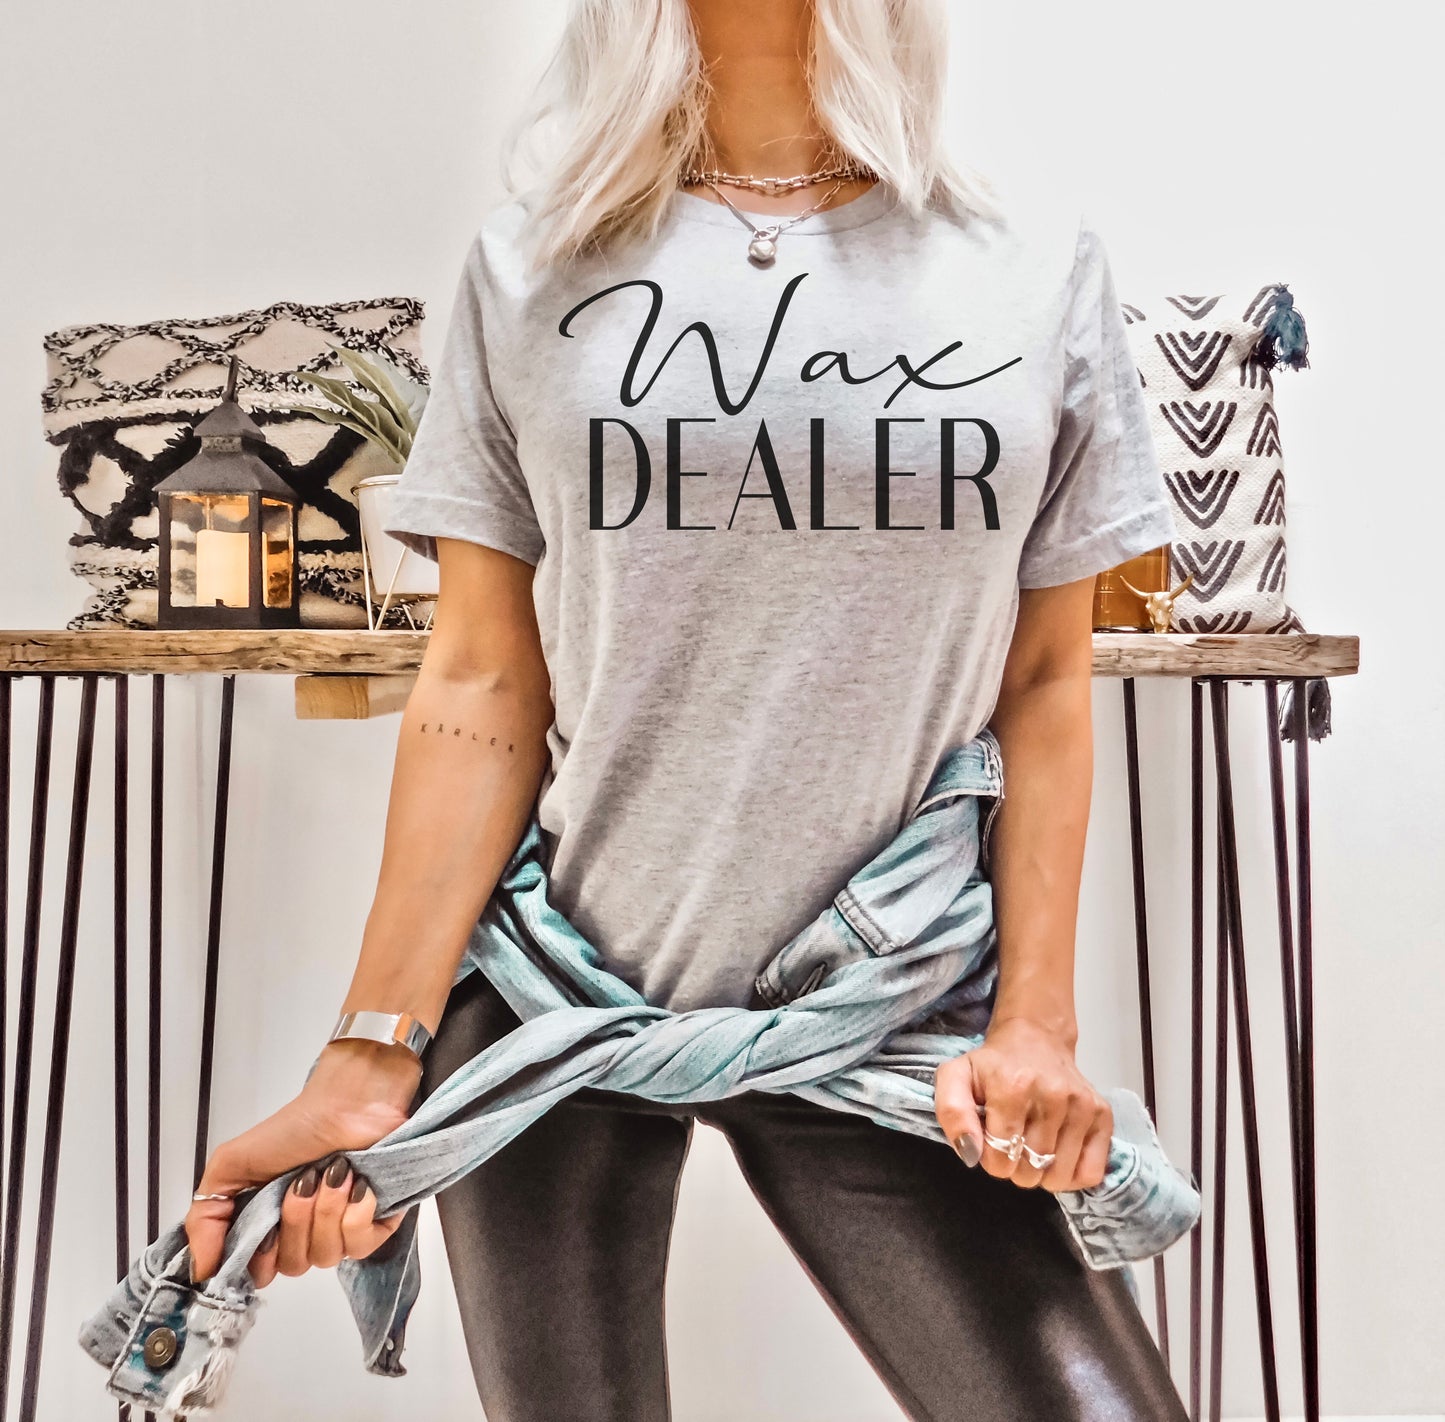 Designs by Prim Designs by Prim Wax Dealer Soft Unisex T-Shirt | Waxing Brazilian Facial Aesthetician Skin Care Expert Cerologist Cera Waxer Cosmetology Graphic Tee Top